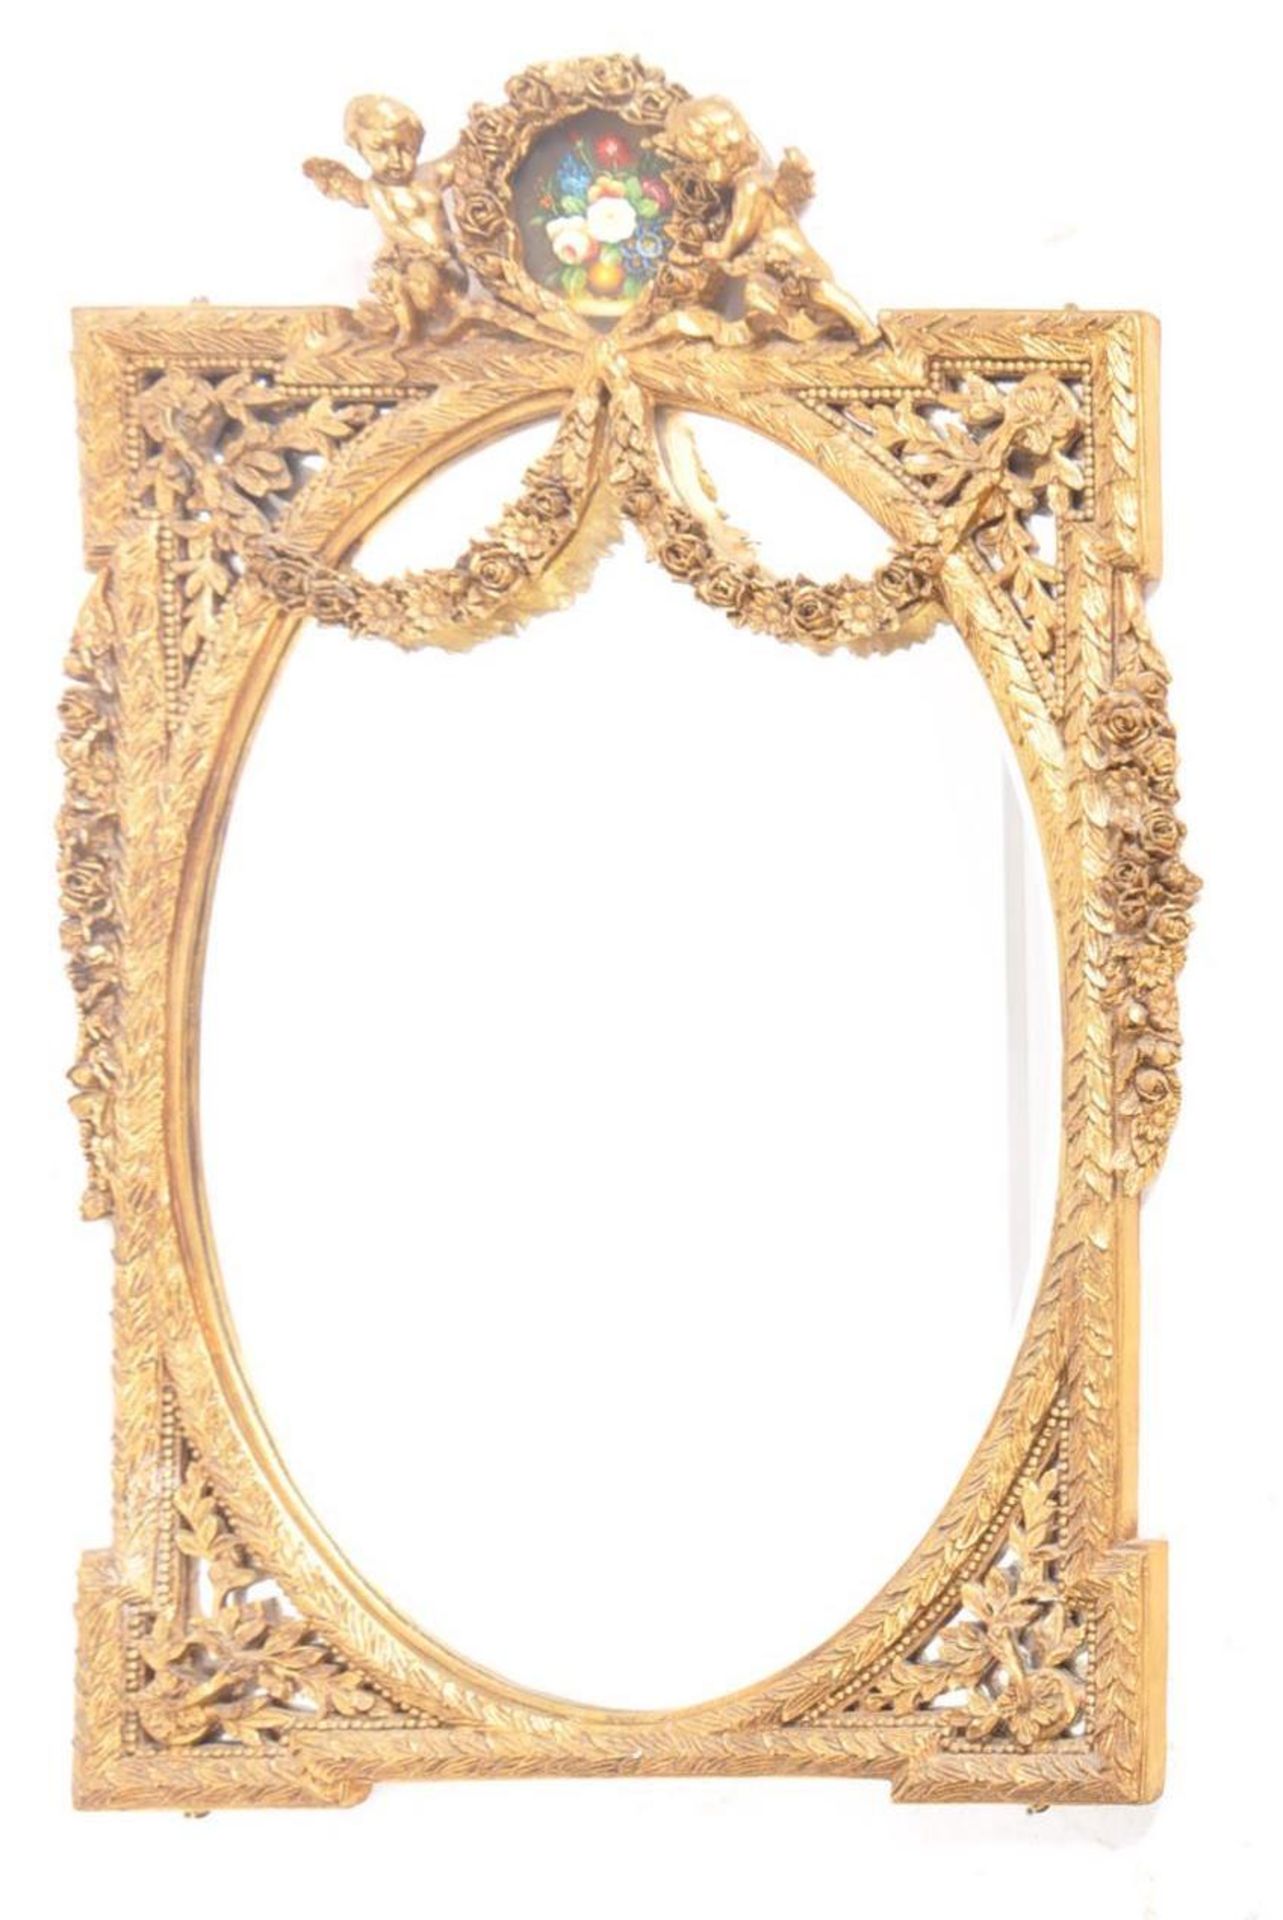 19TH CENTURY FRENCH GILT GESSO GARLAND PUTTI SWAG MIRROR - Image 2 of 7